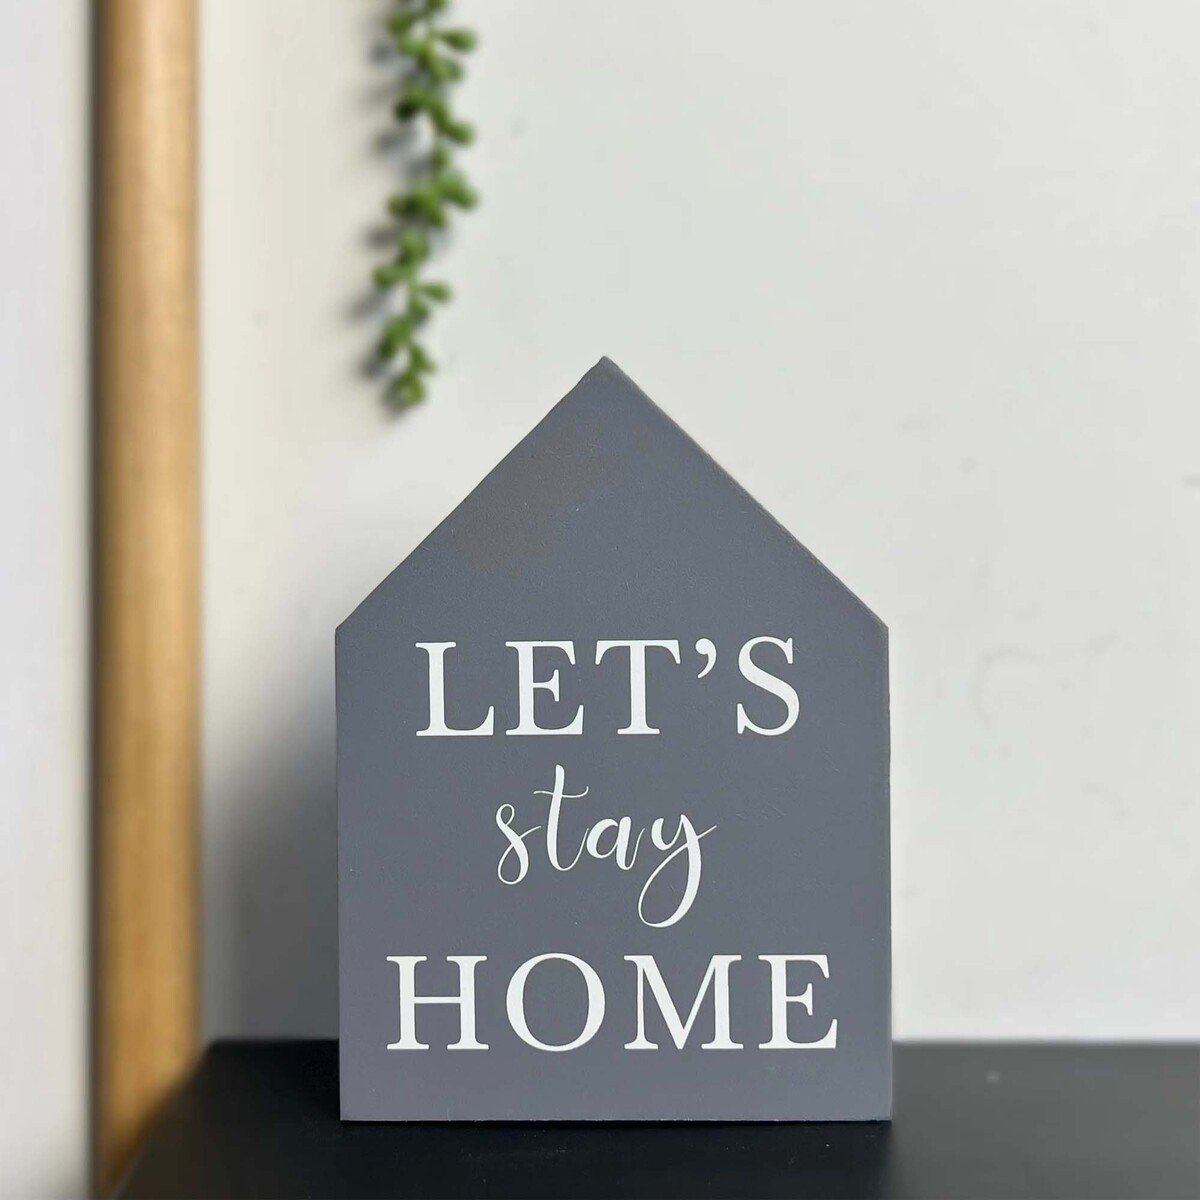 Maple Leaf Home Sweet Home/Lets Stay Home Sign Wooden Wall And Table Decor, 10 x 2 x 14 cm, HT74943A/B